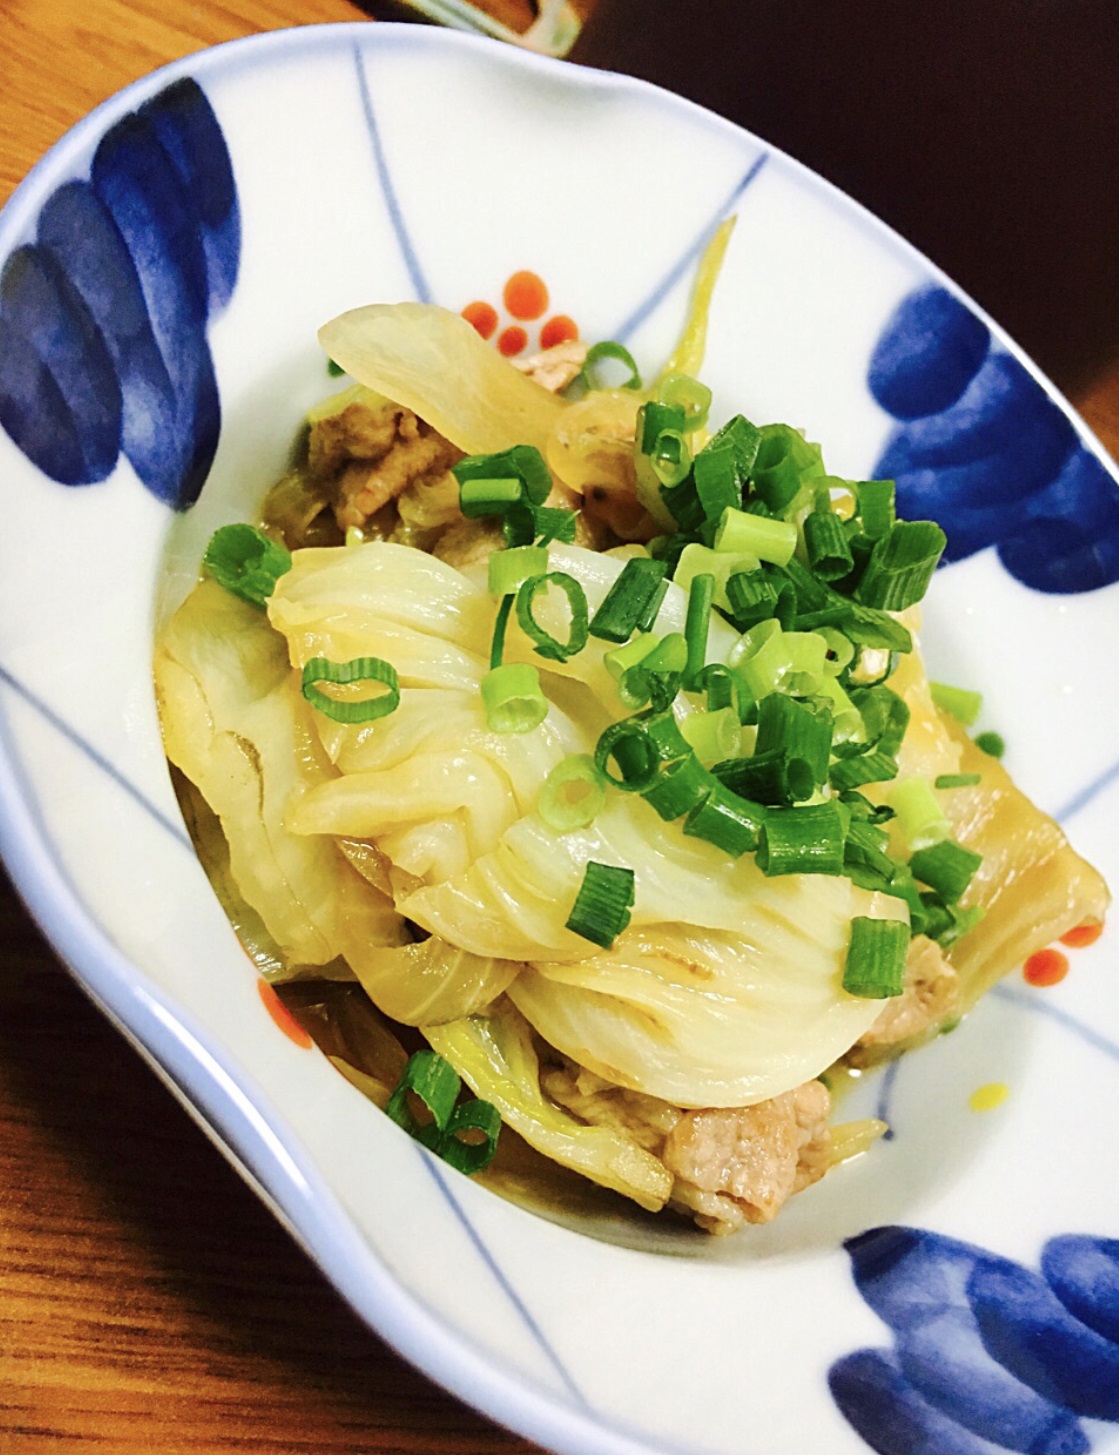 Simmered Pork Belly and chinese cabbage, and chopped green onions on top.